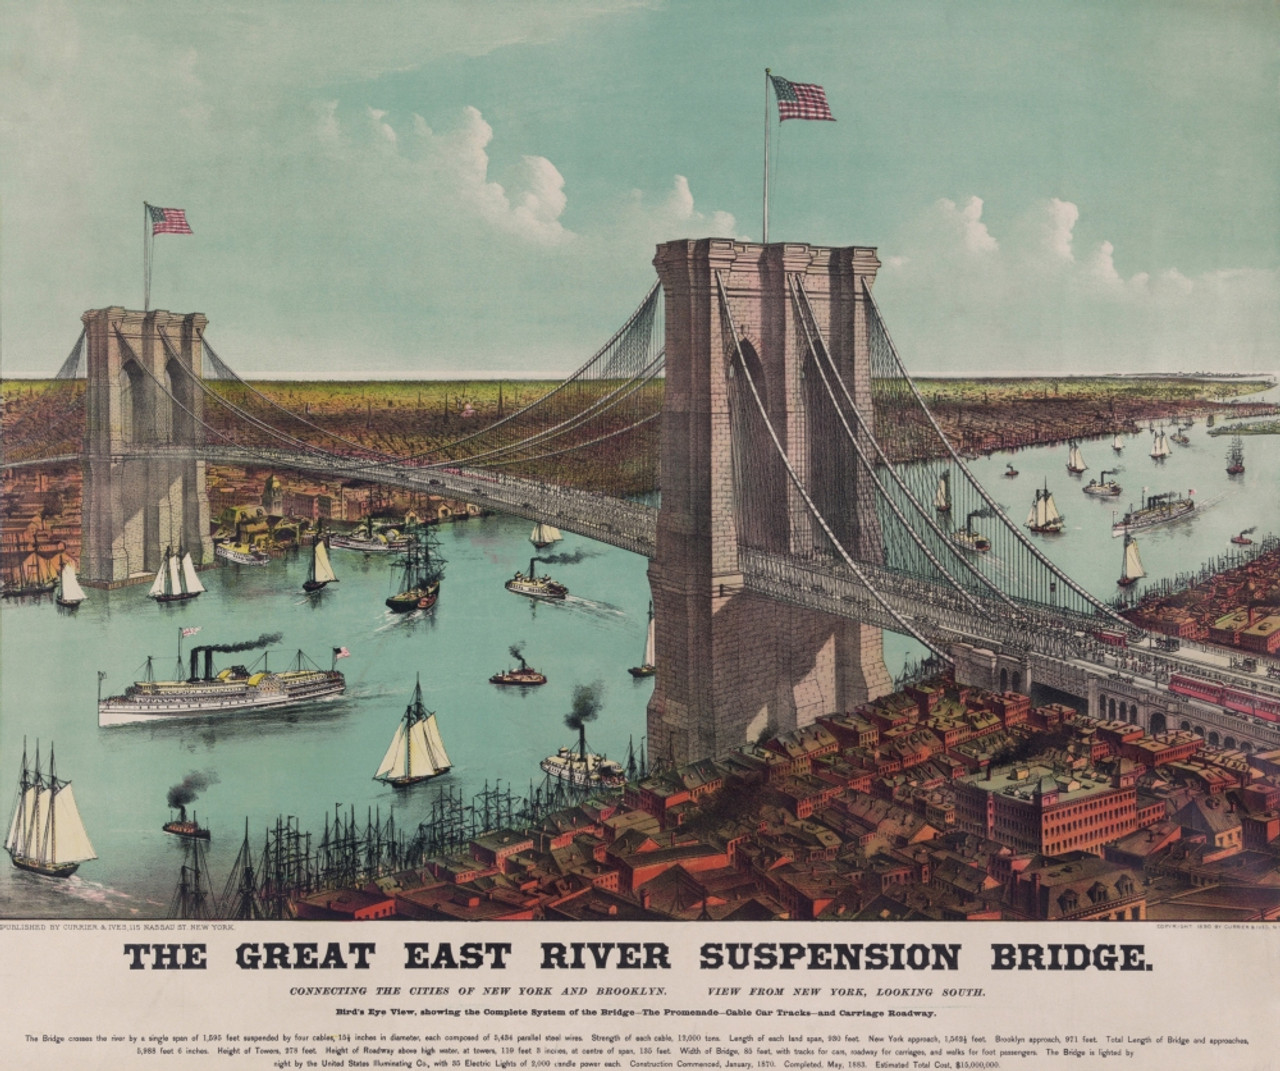 The VAREVCHISL023EC020 Item Viewed History And - Carriage By Posterazzi 1890 Ives. Lc-Dig-Pga-03206 # Looking Chromolithograph - Brooklyn Showing Brooklyn Car From Bridge Manhattan Toward Promenade The South Currier Tracks Cable Roadway.